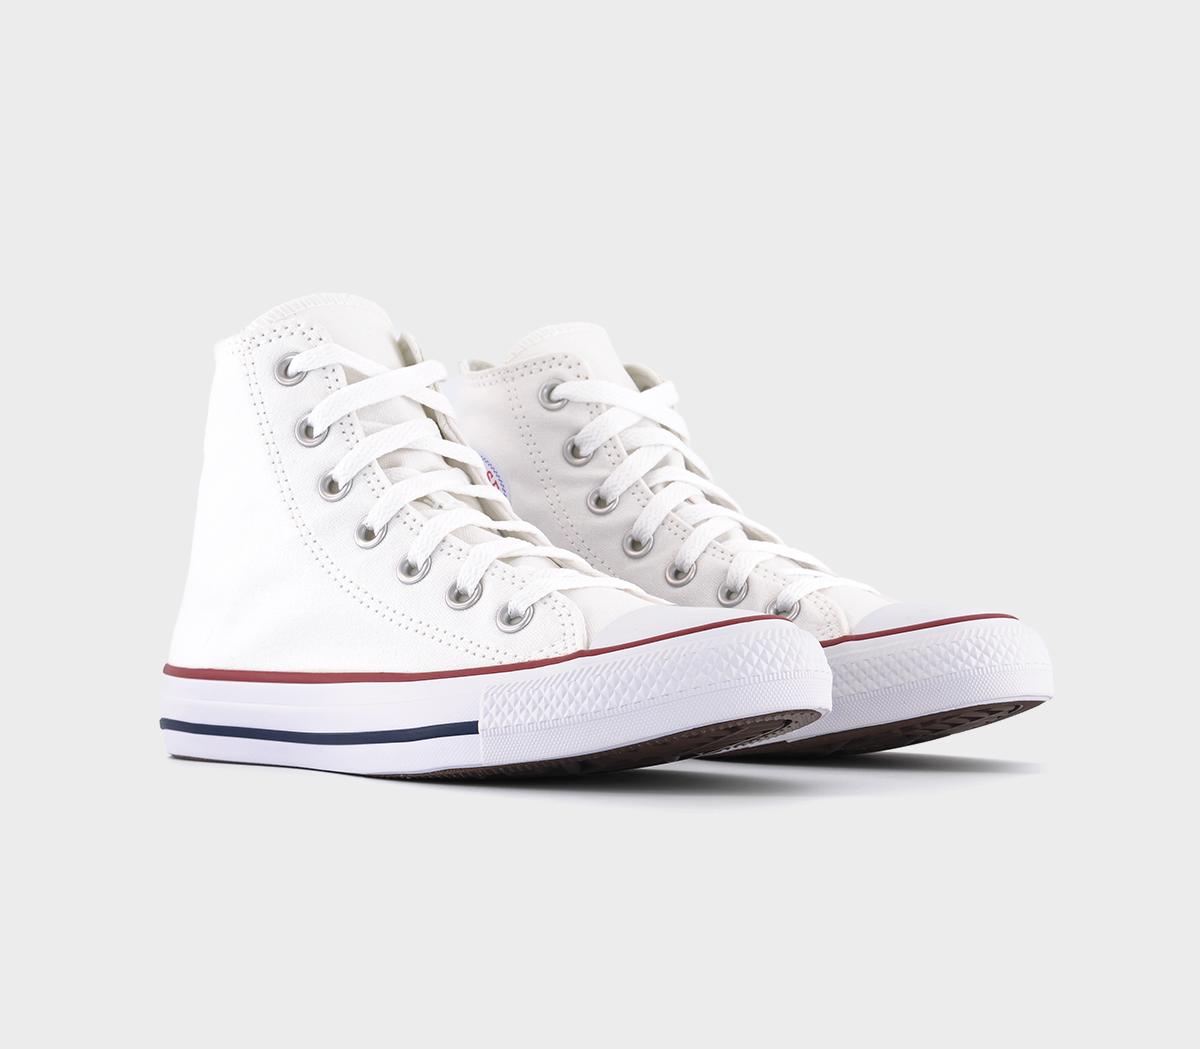 Converse White All Star High Optical Trainers, 12